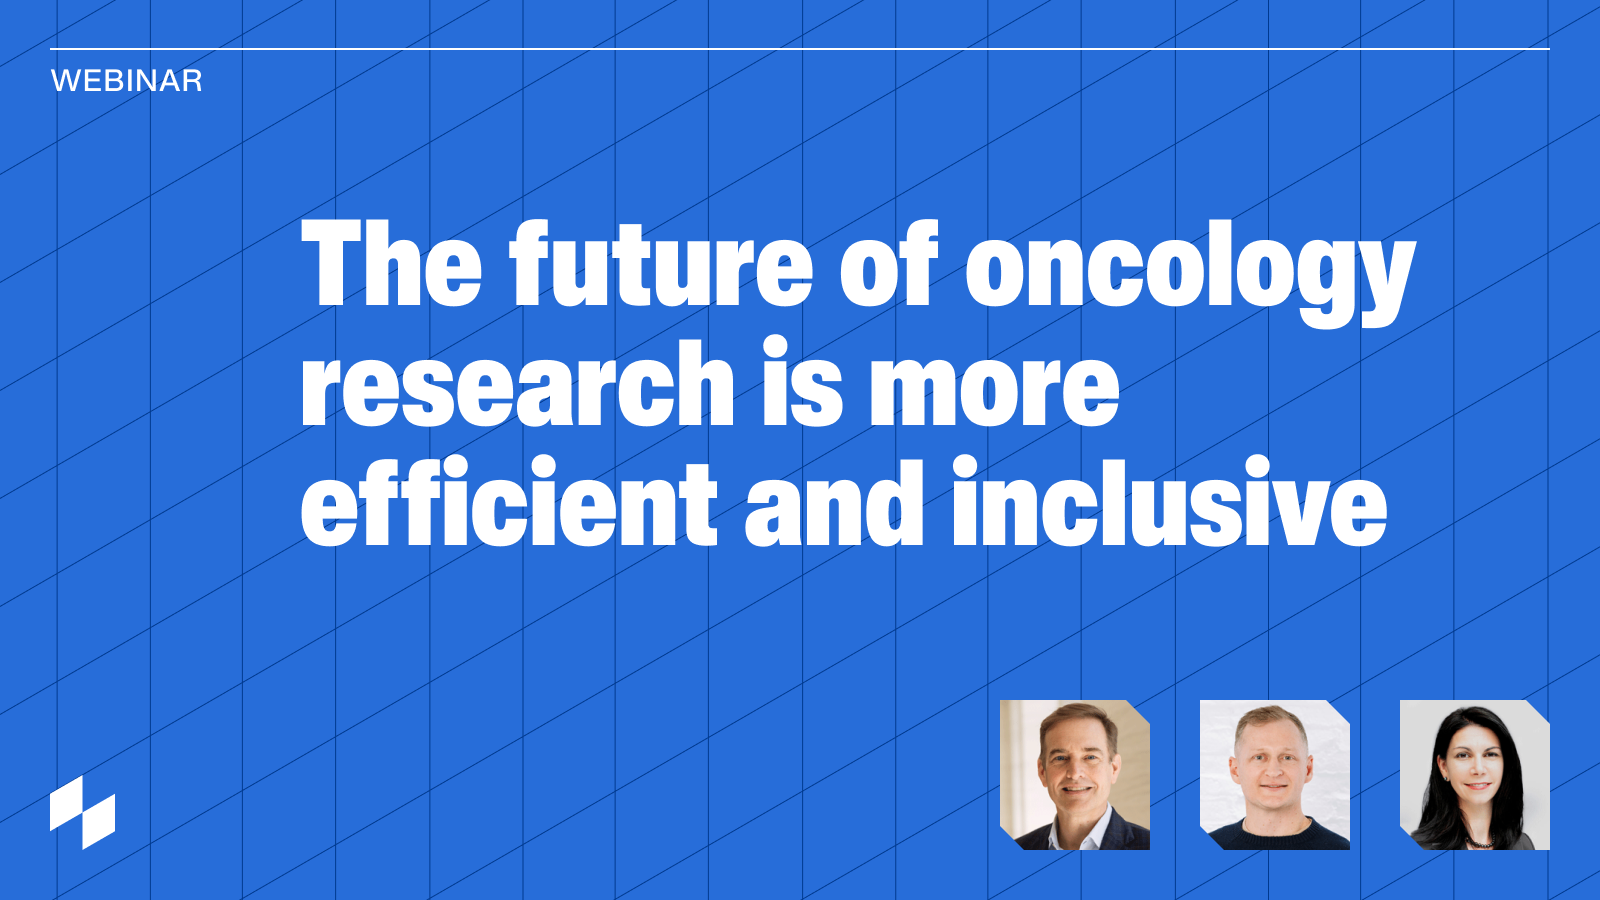 The future of oncology